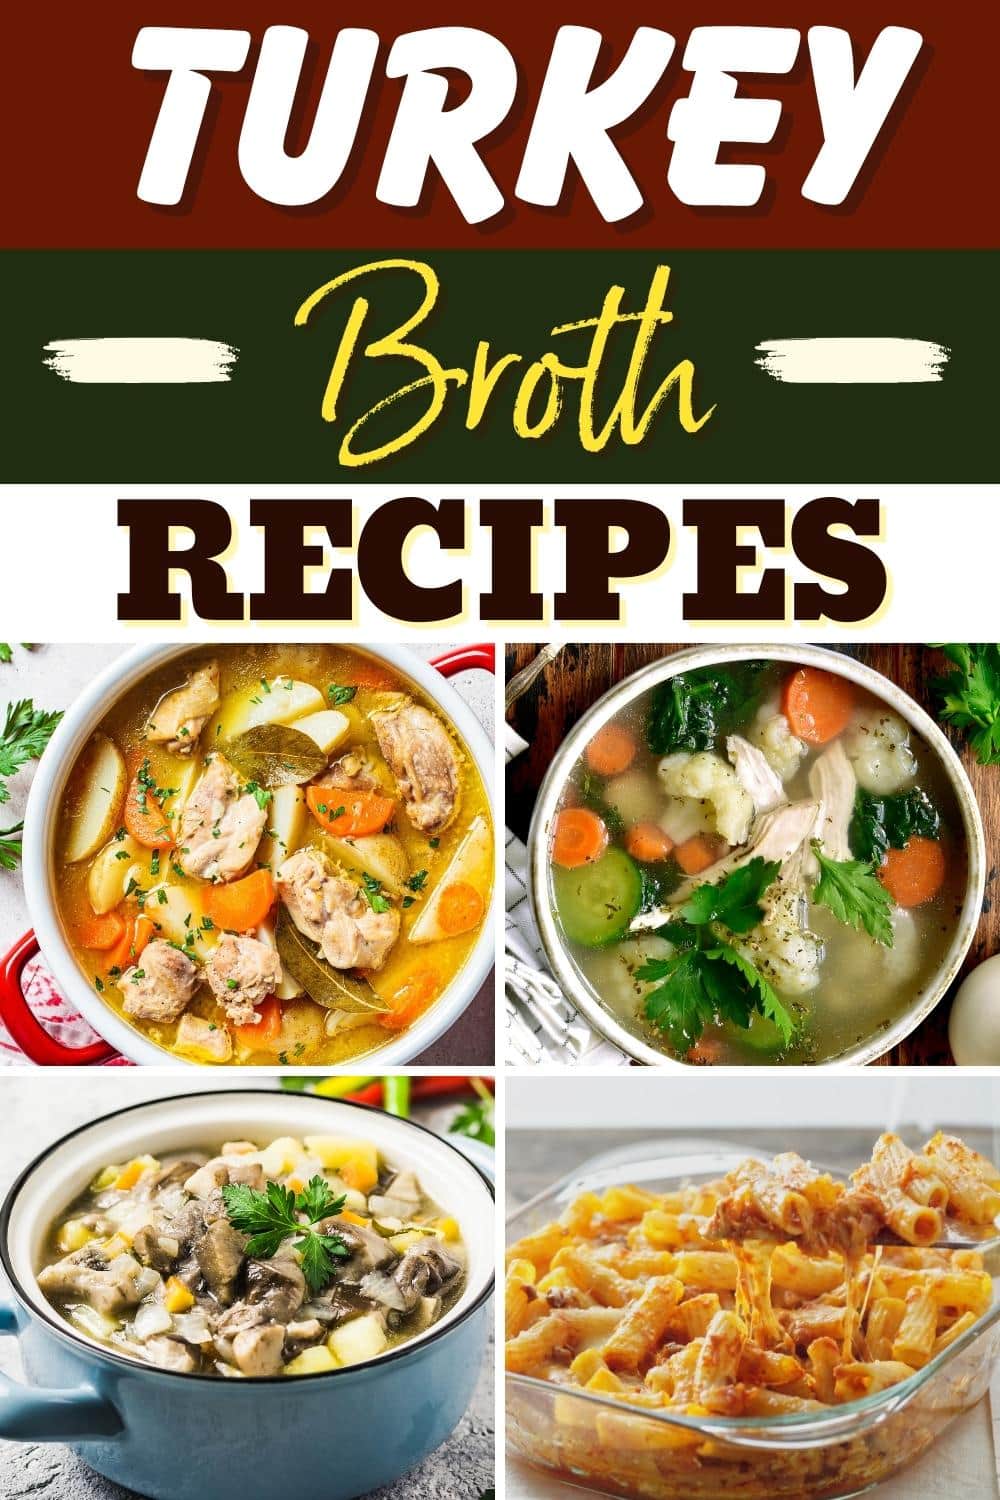 17 Recipes with Turkey Broth (Soups and More) - Insanely Good